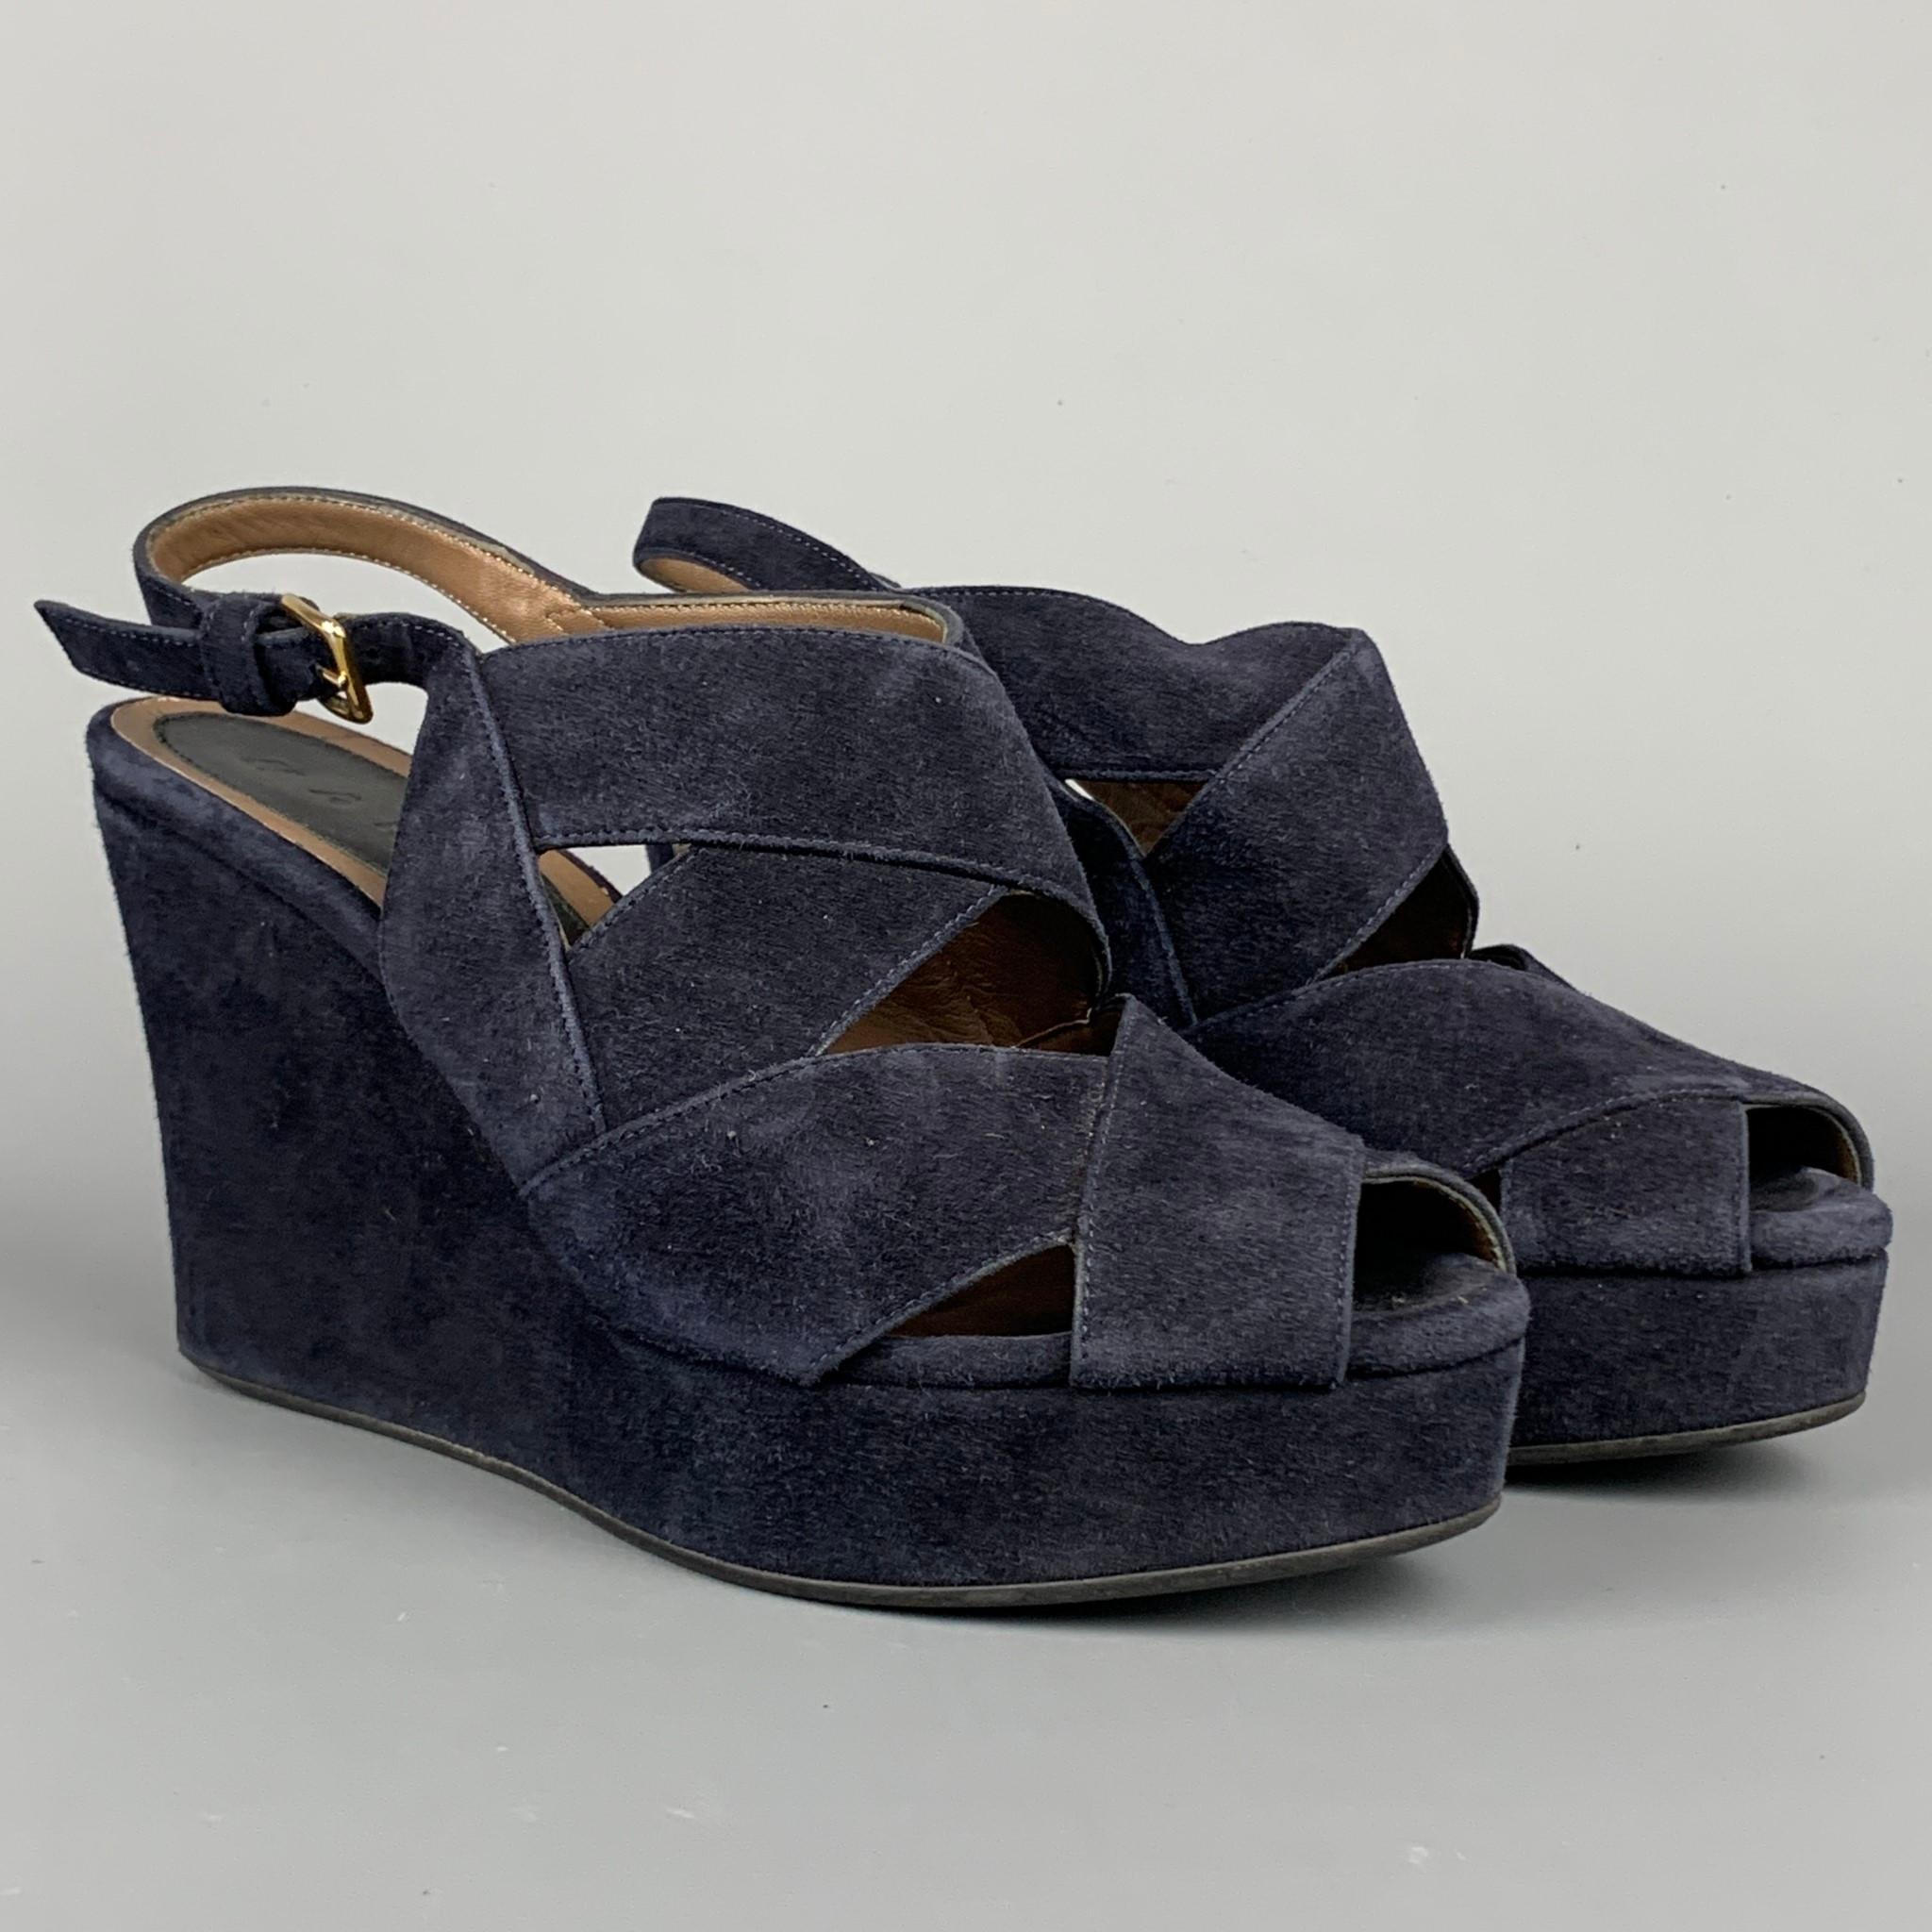 MARNI sandals comes in a navy suede featuring a ankle strap, platform, and a wedge heel. Made in Italy

Very Good Pre-Owned Condition. Light fading at exterior.
Marked: 36

Measurements:

Heel: 4 in.
Platform: 1 in. 